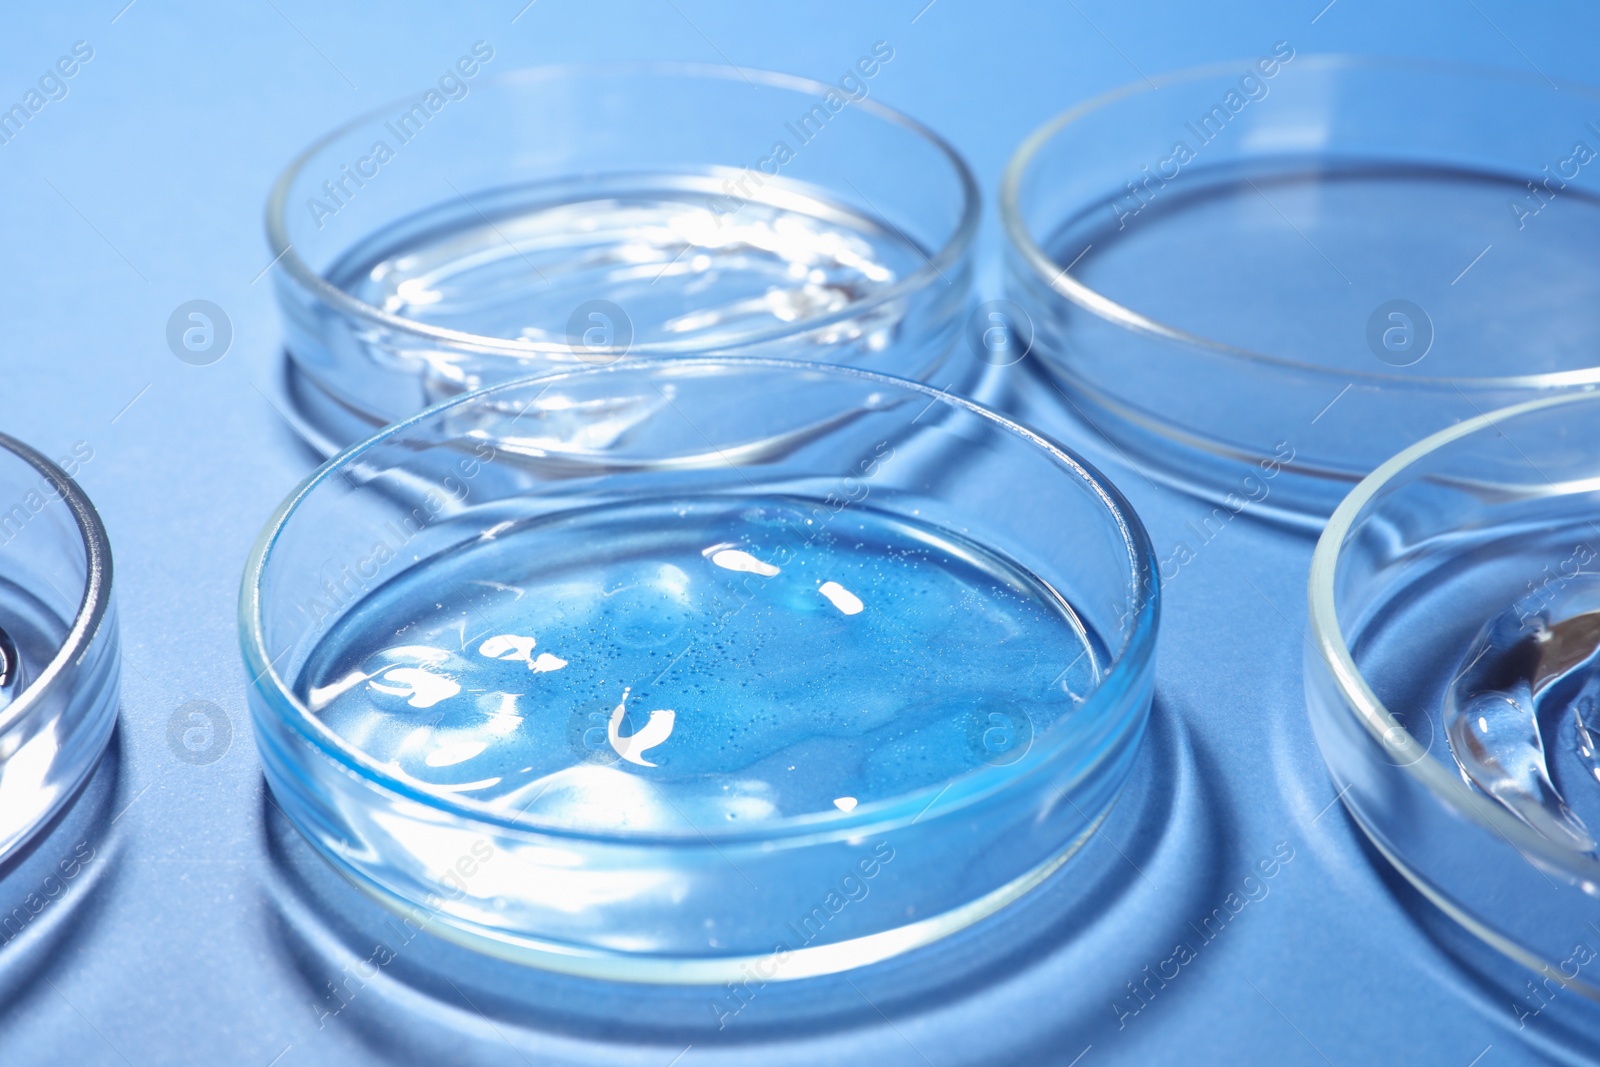 Photo of Petri dishes with liquids on blue background, closeup